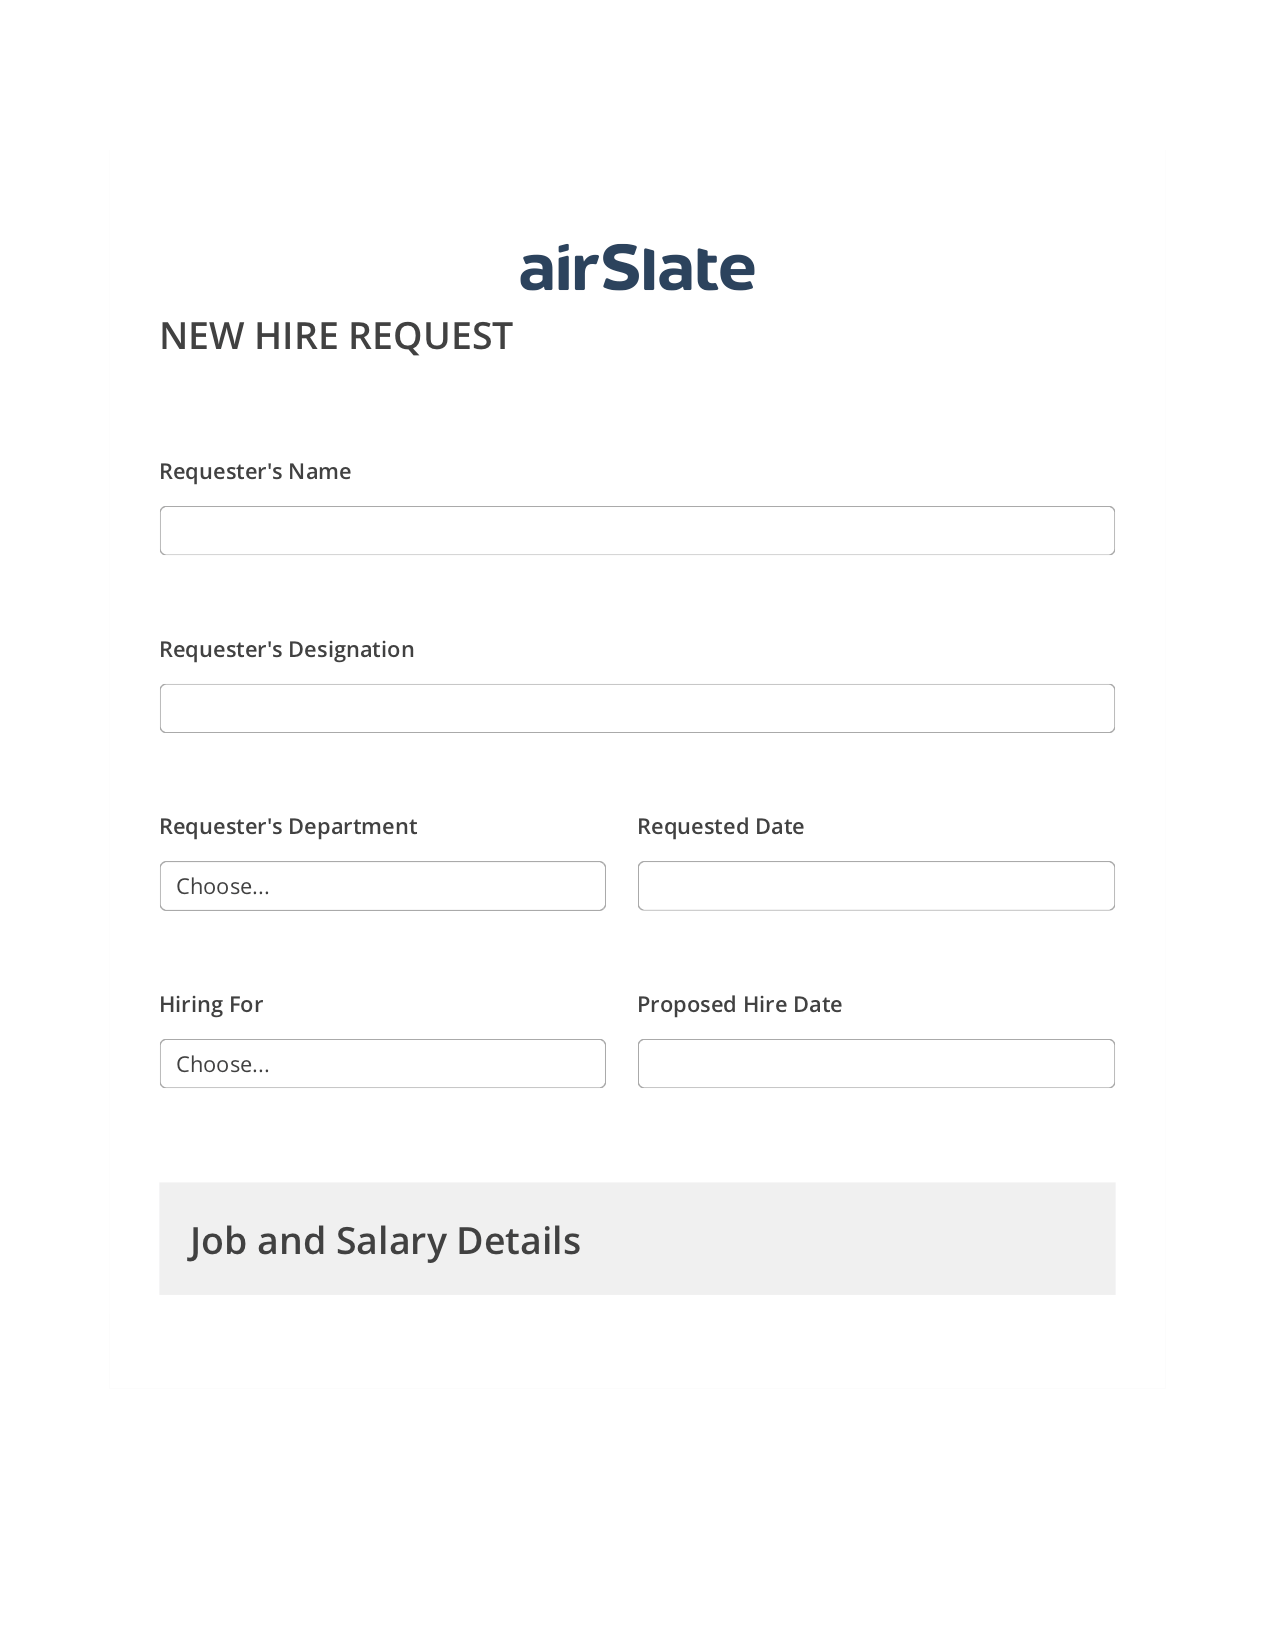 Hiring Request Workflow Pre-fill from Google Sheets Bot, Export to MS Dynamics 365 Bot, Export to Google Sheet Bot